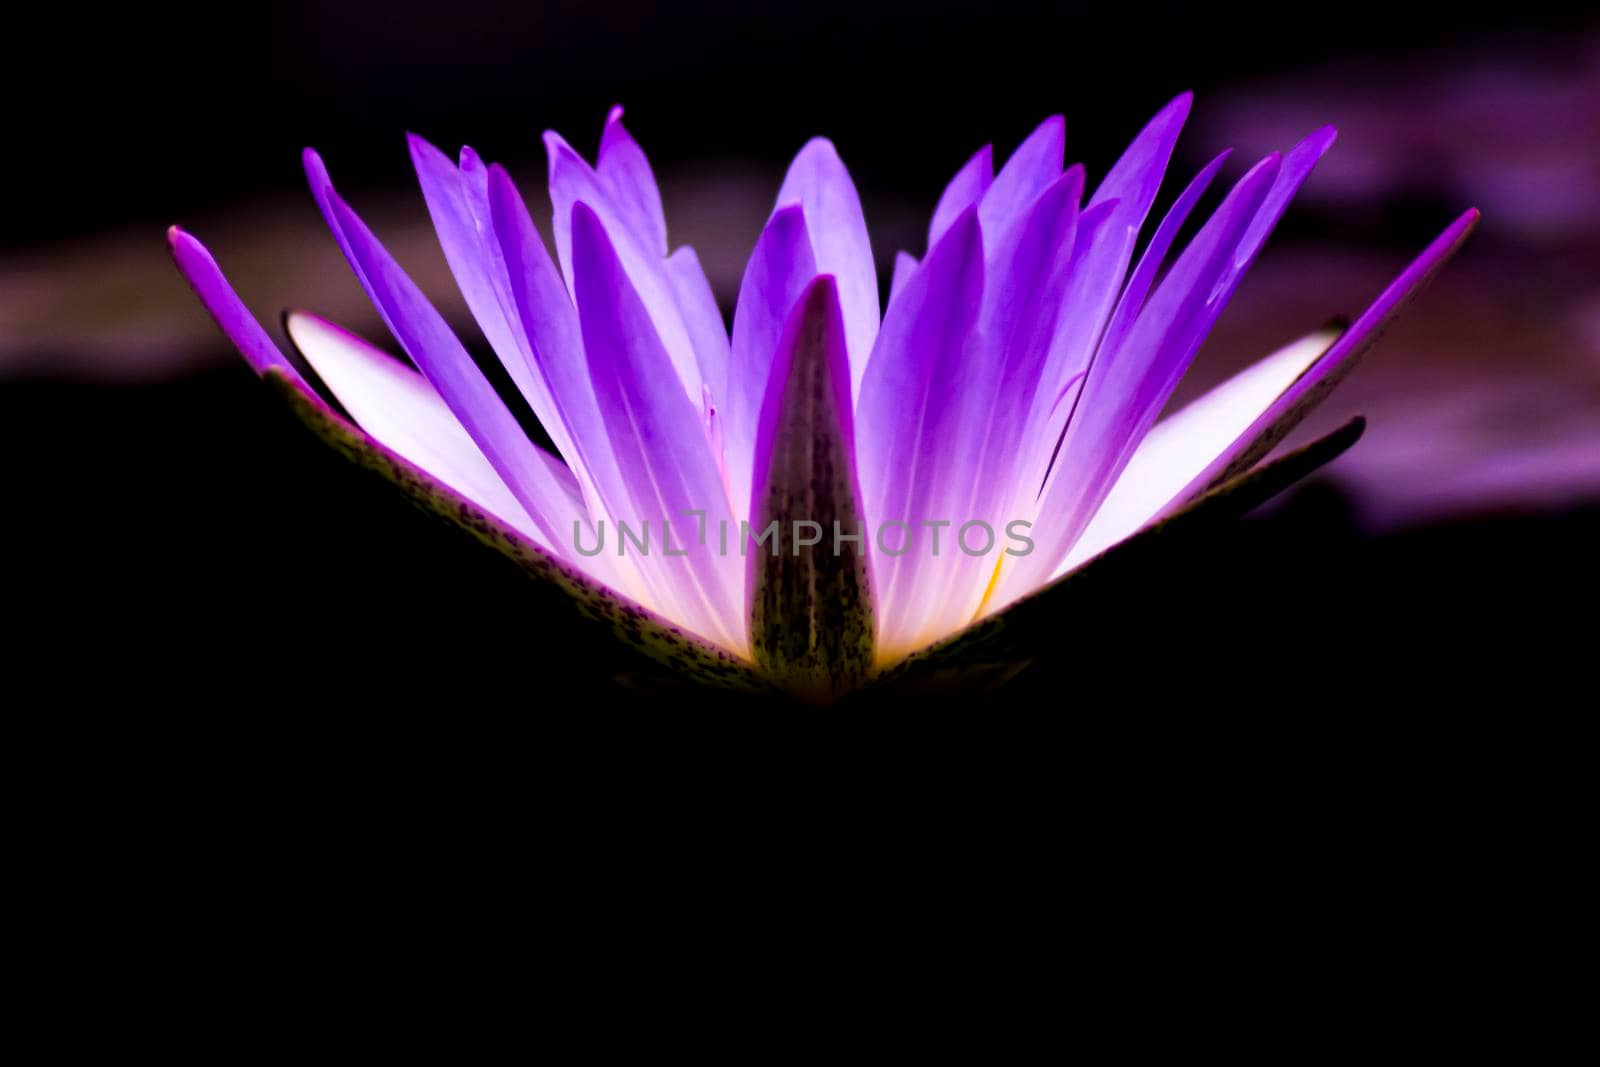 Violet Lotus Flower Close up. Purple Flower, Close-up, Petals. Symbolic Meanings of the Lotus in Buddhism. by Petrichor